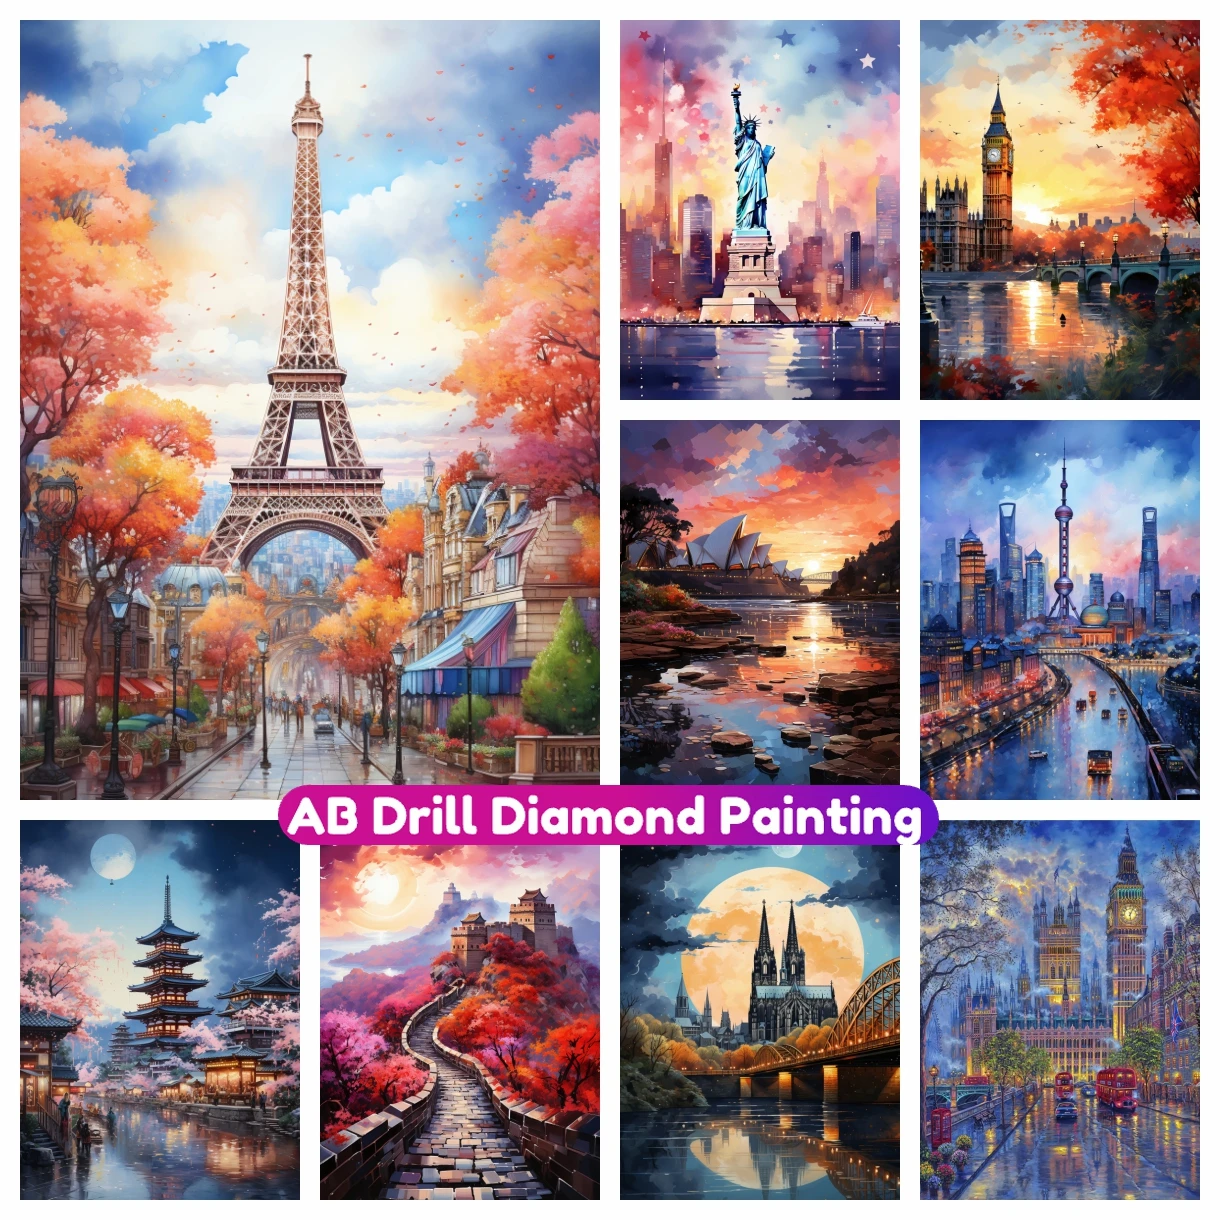 

Watercolor Famous Landscape AB Diamond Painting 5D DIY Full Drill Rhinestone Mosaic Embroidery Cross Stitch Kit Home Decor Gift